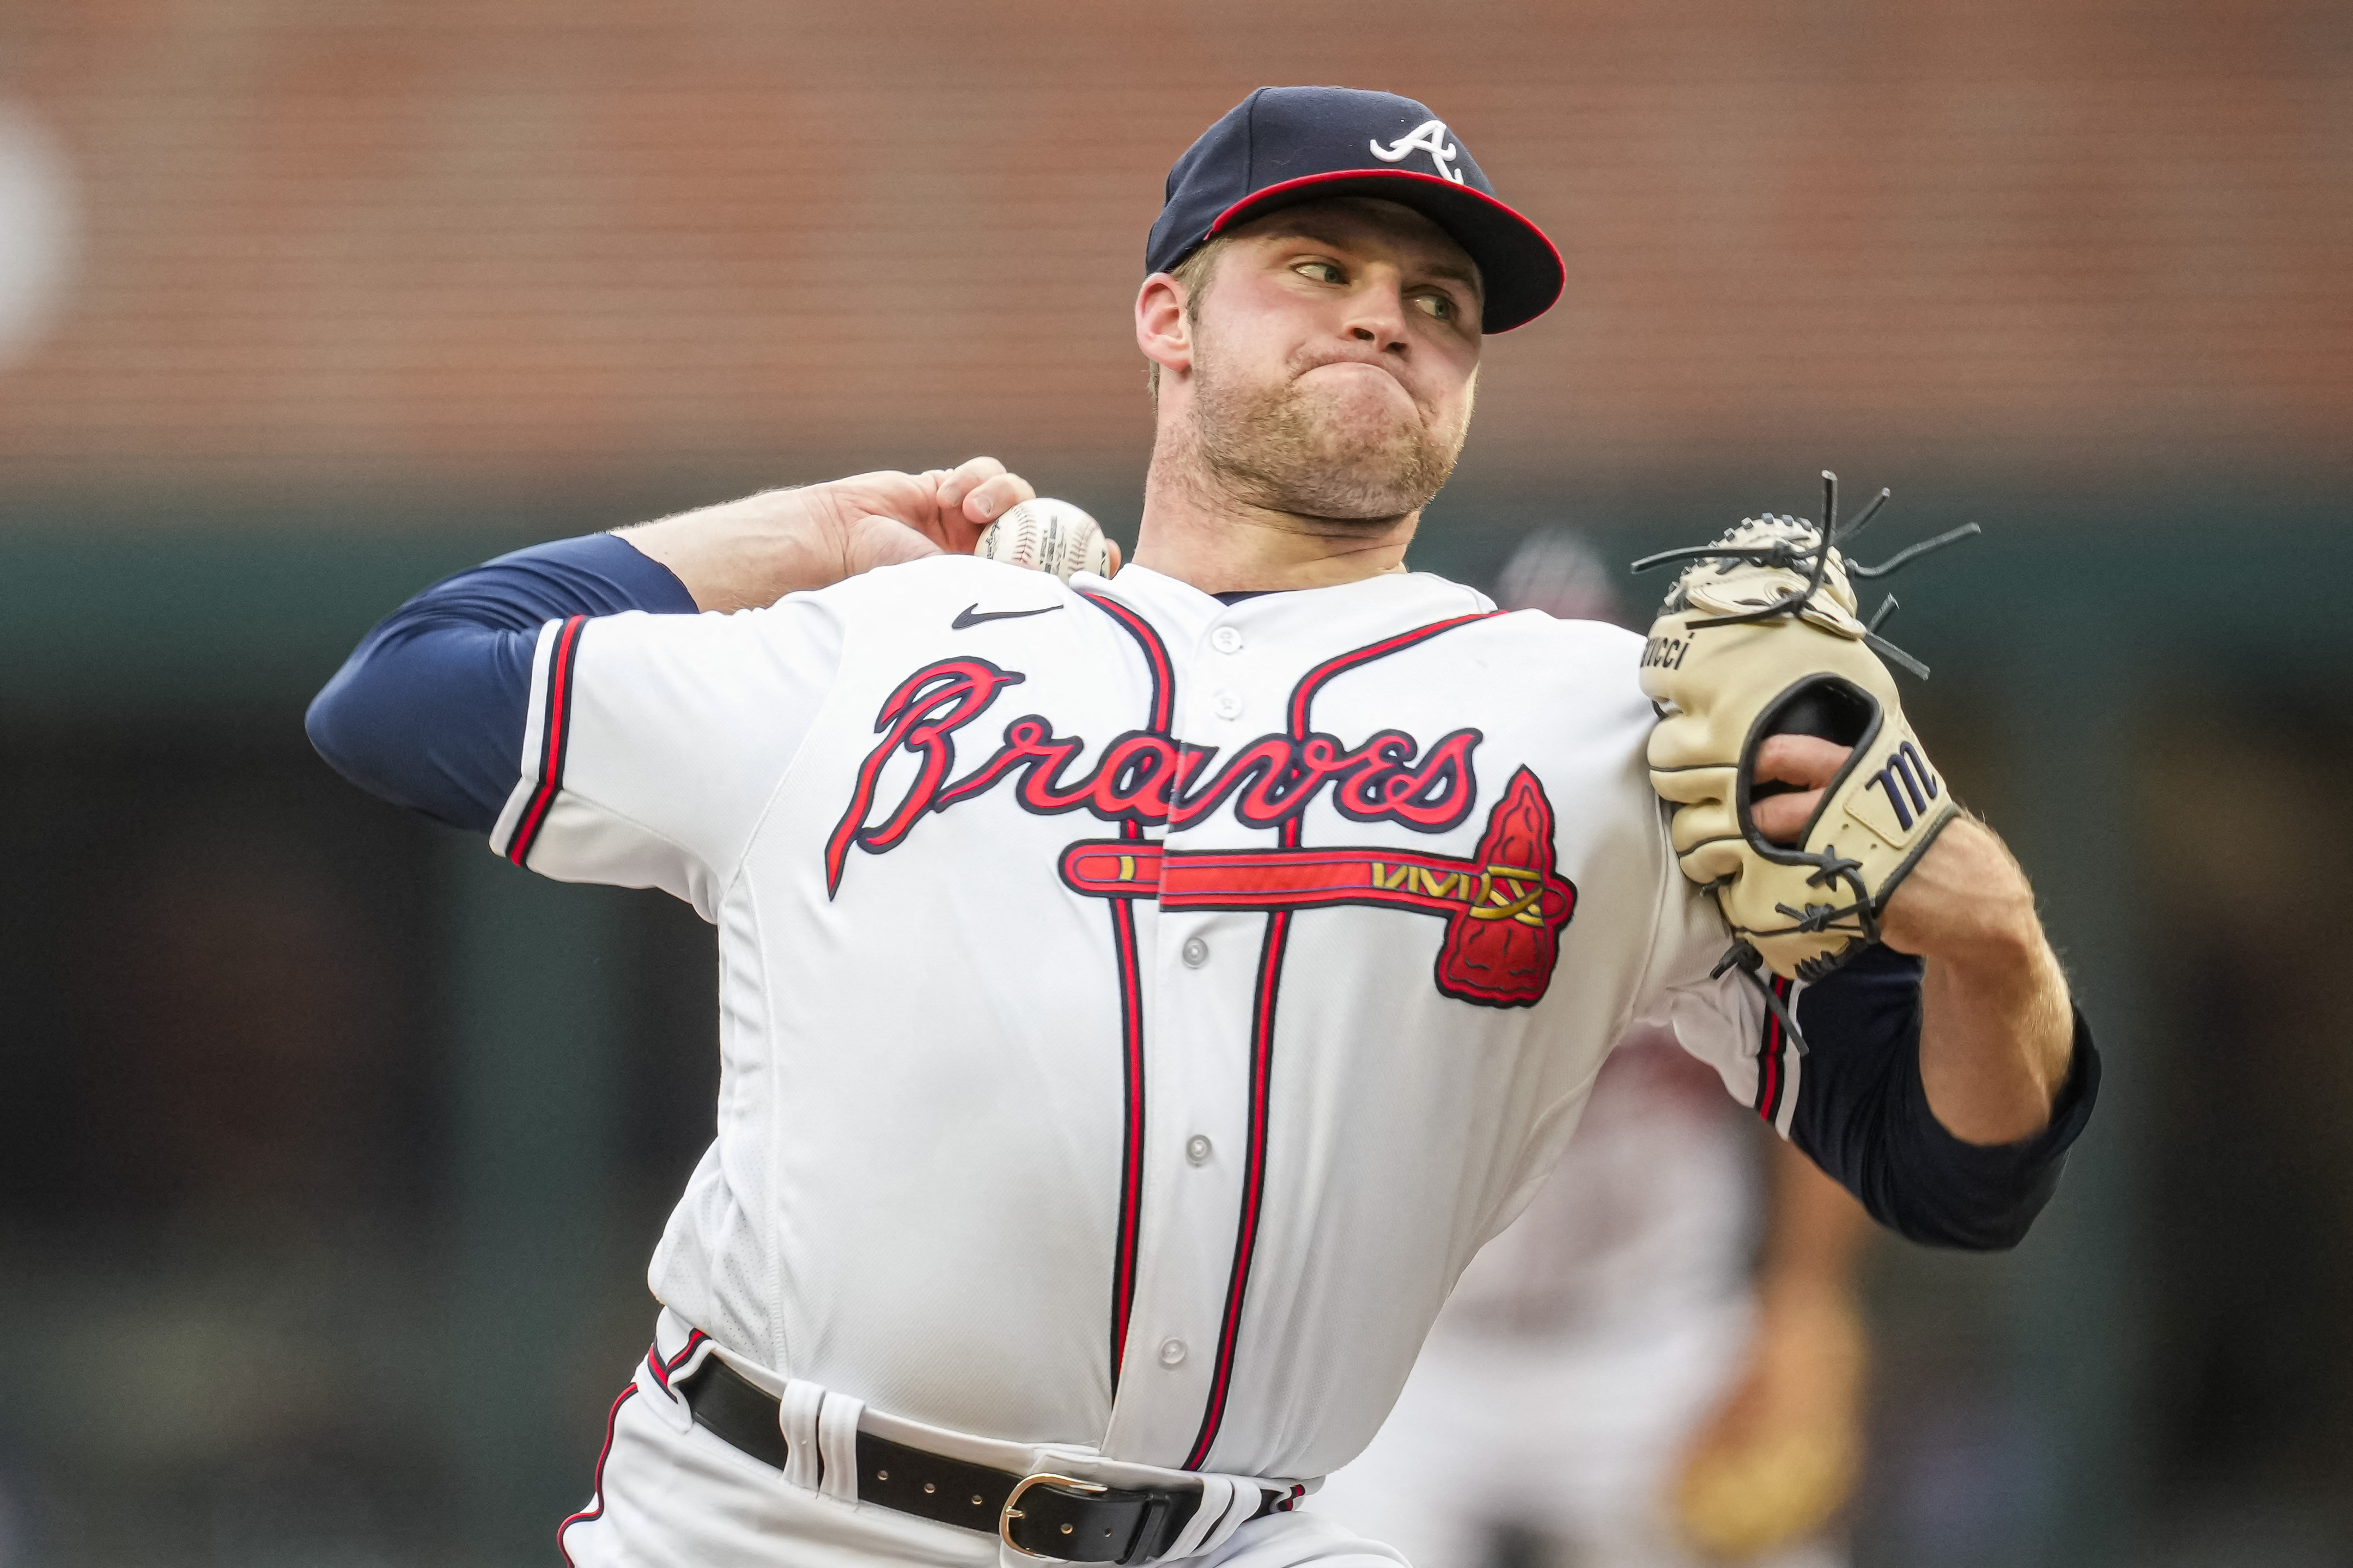 Bryce Elder, Braves hold skidding Yankees to one hit in 5-0 win